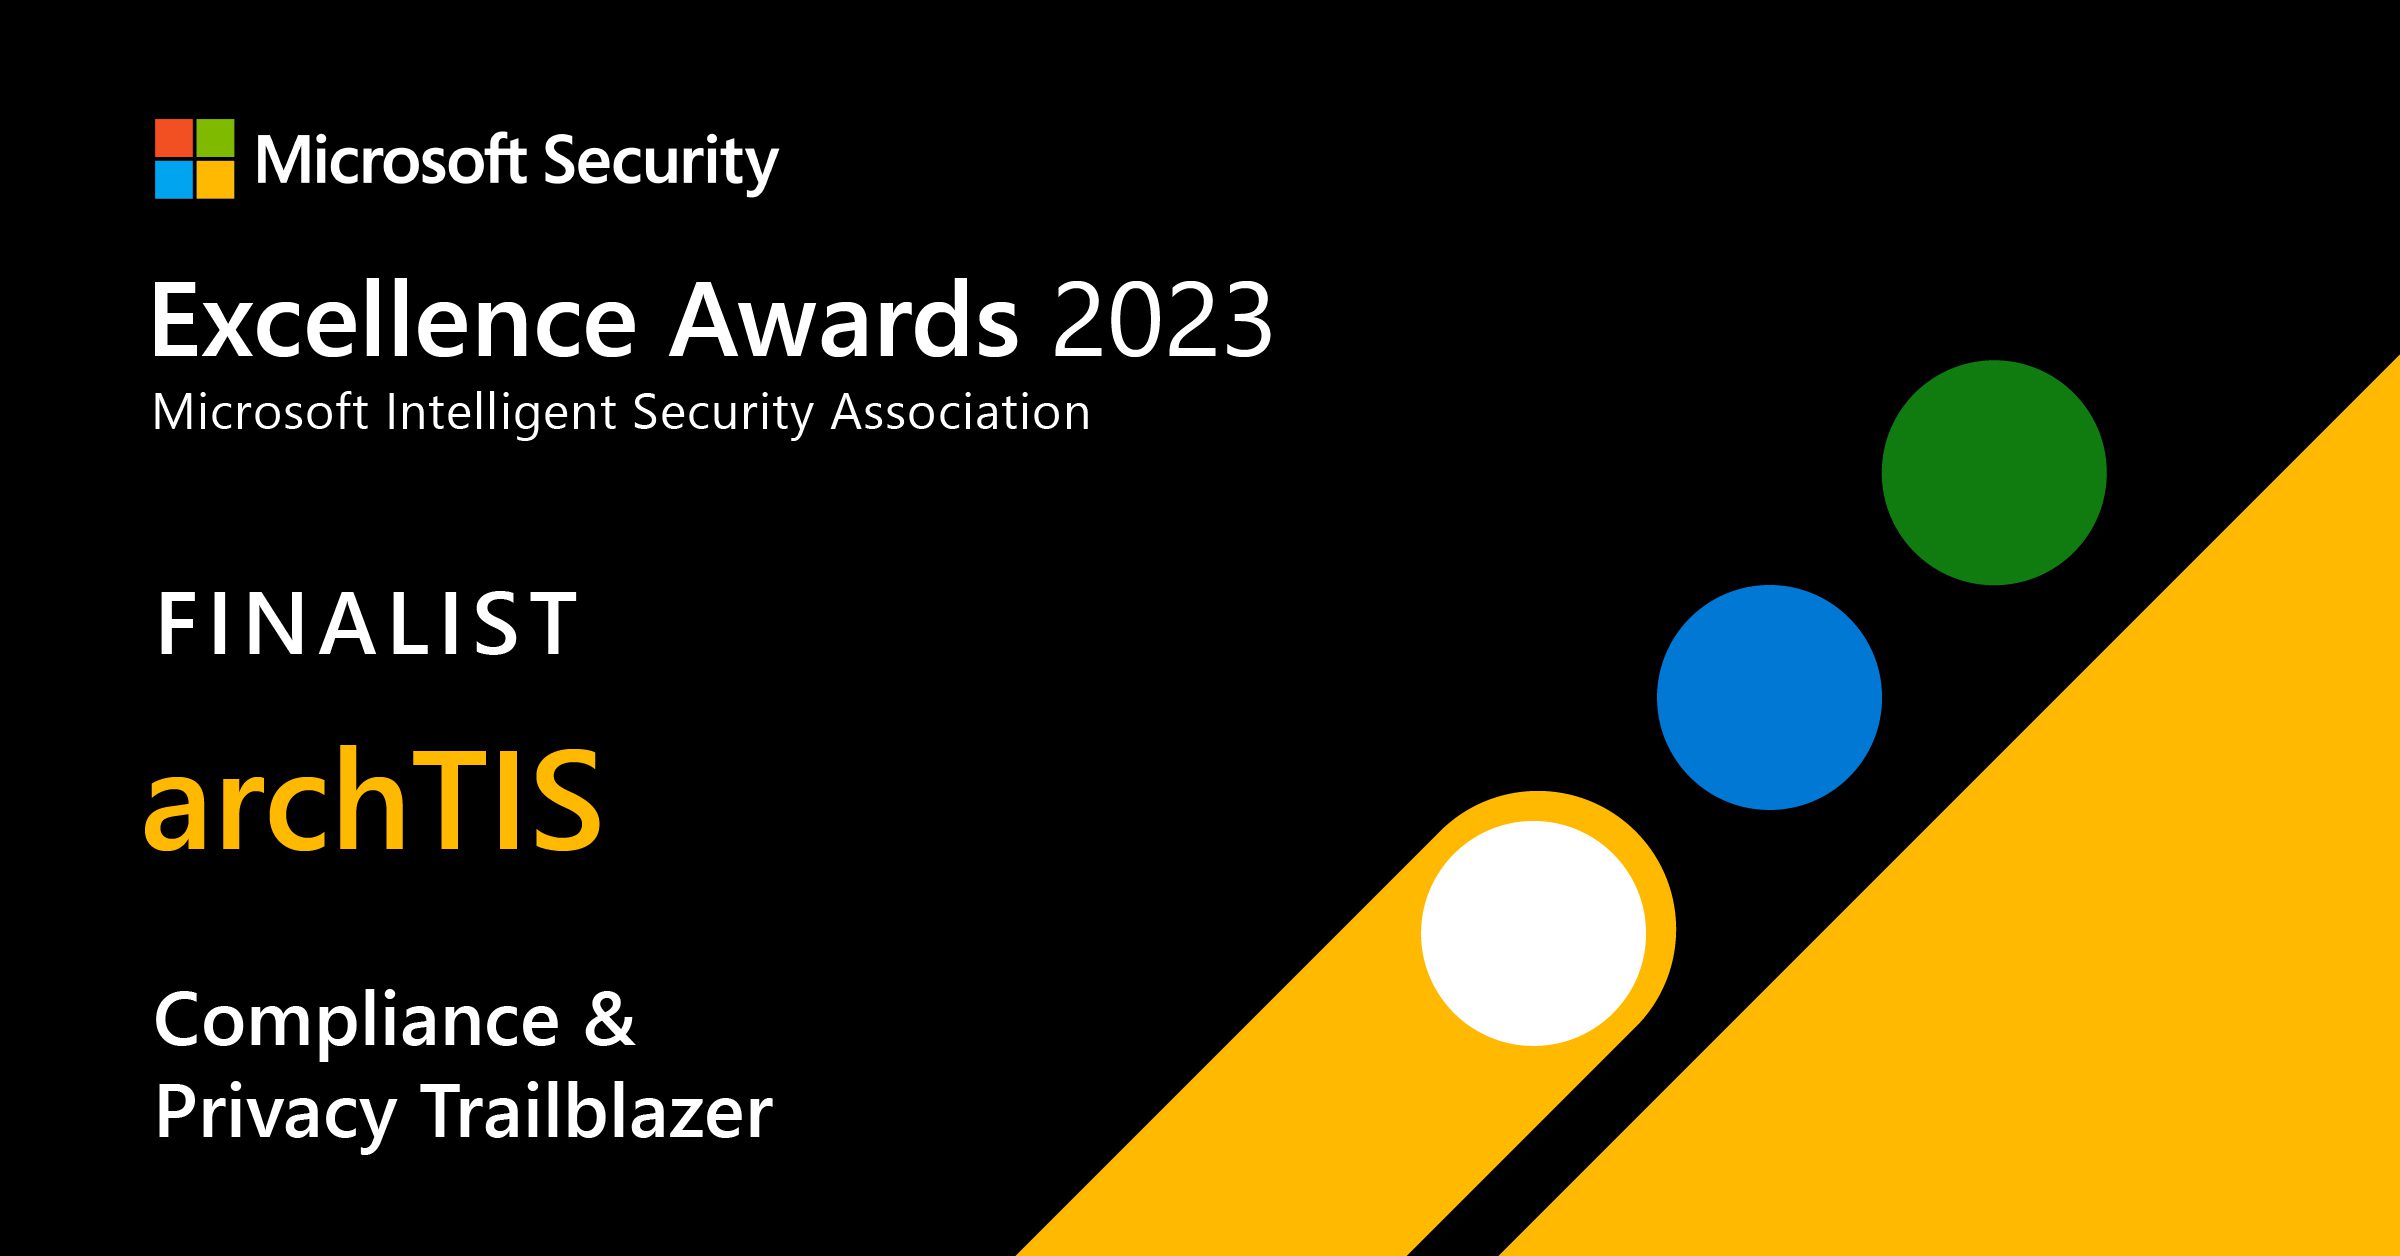 archTIS is a Microsoft Security Excellence Awards Privacy and Compliance Trailblazer Finalist